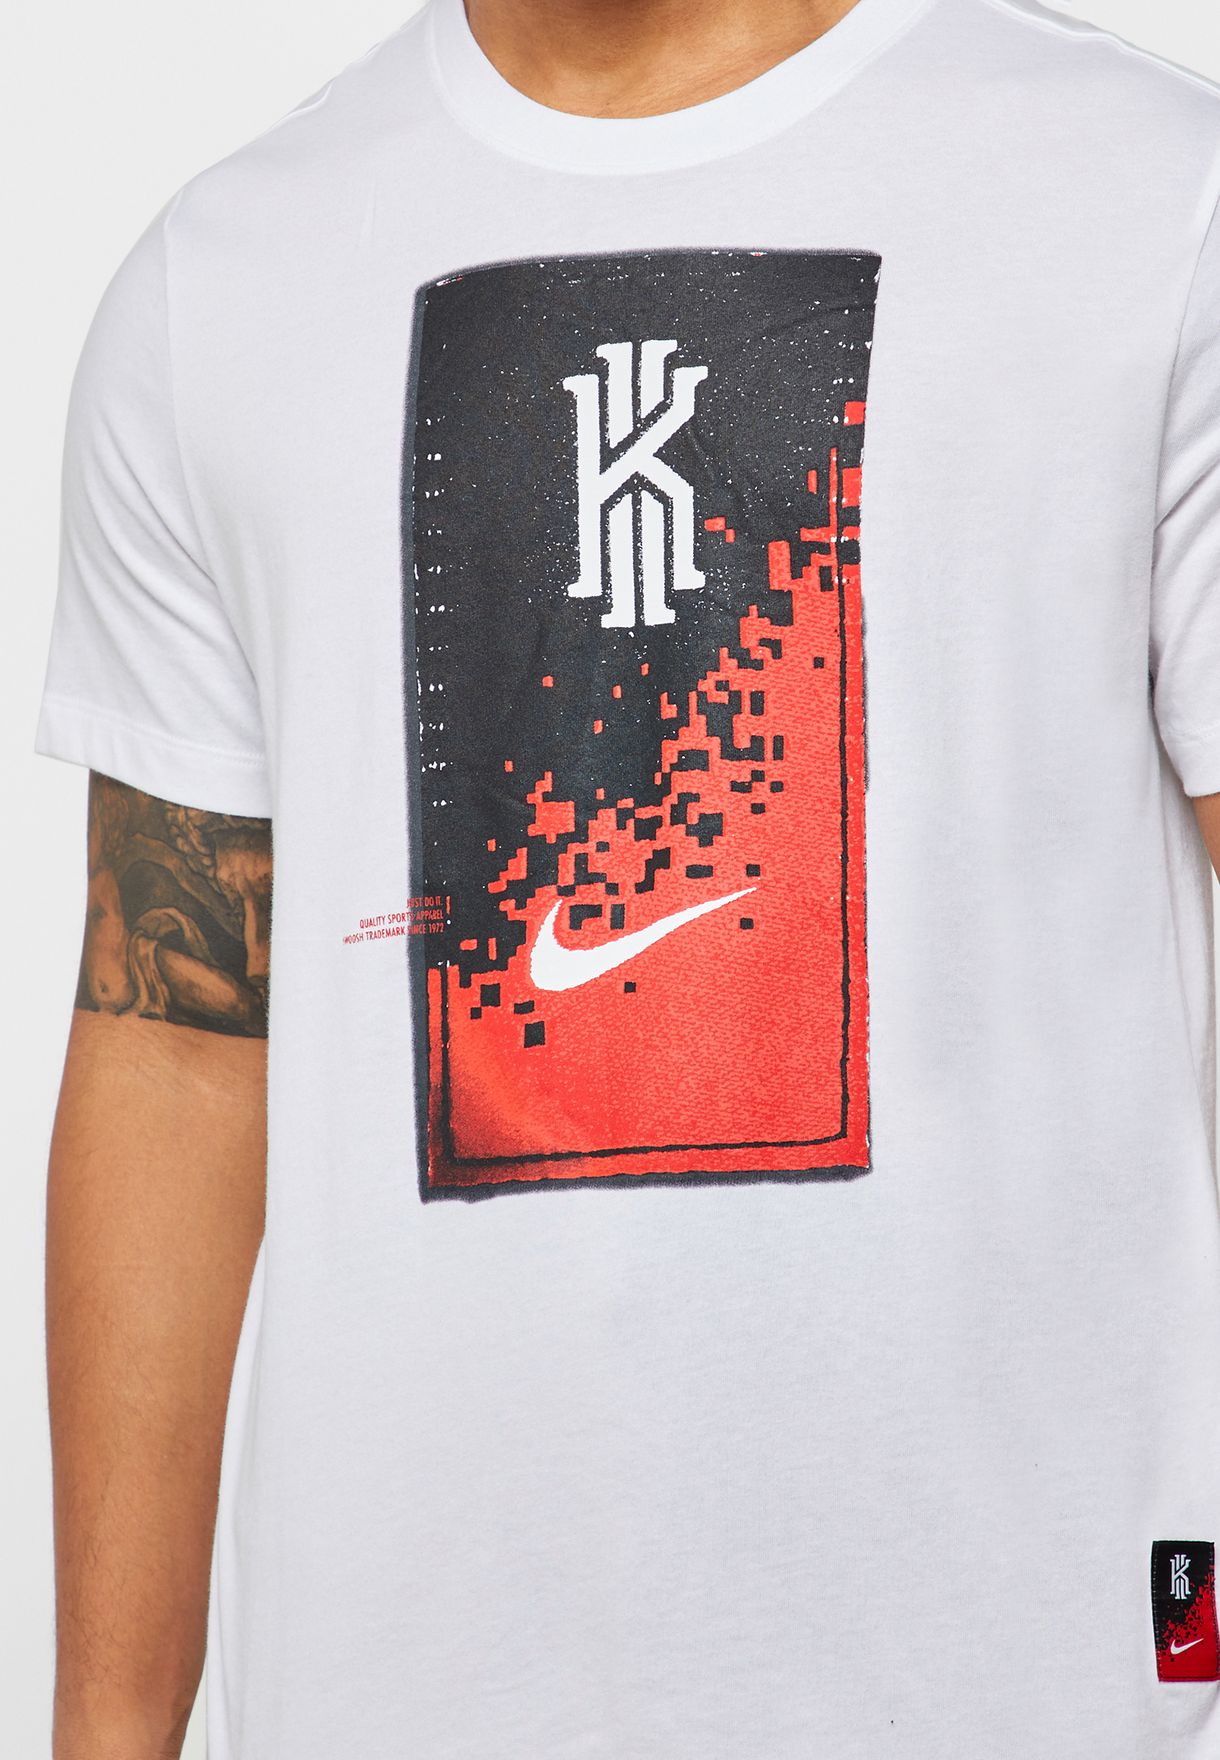 kyrie irving tee shirts